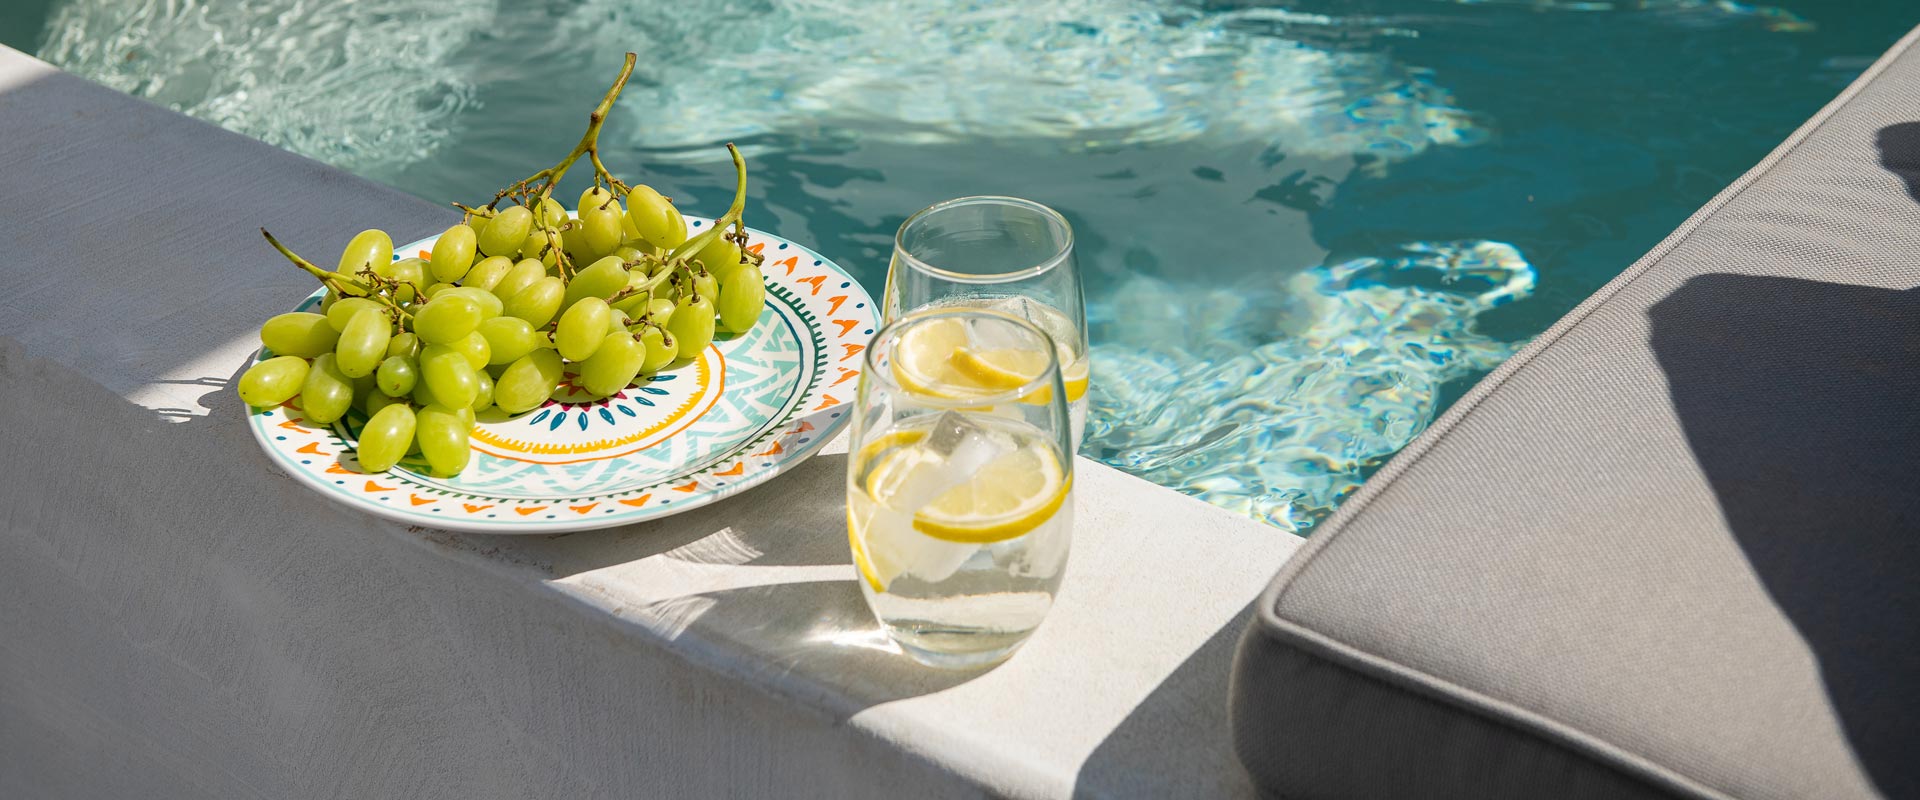 Grapes and drinks by the Pool